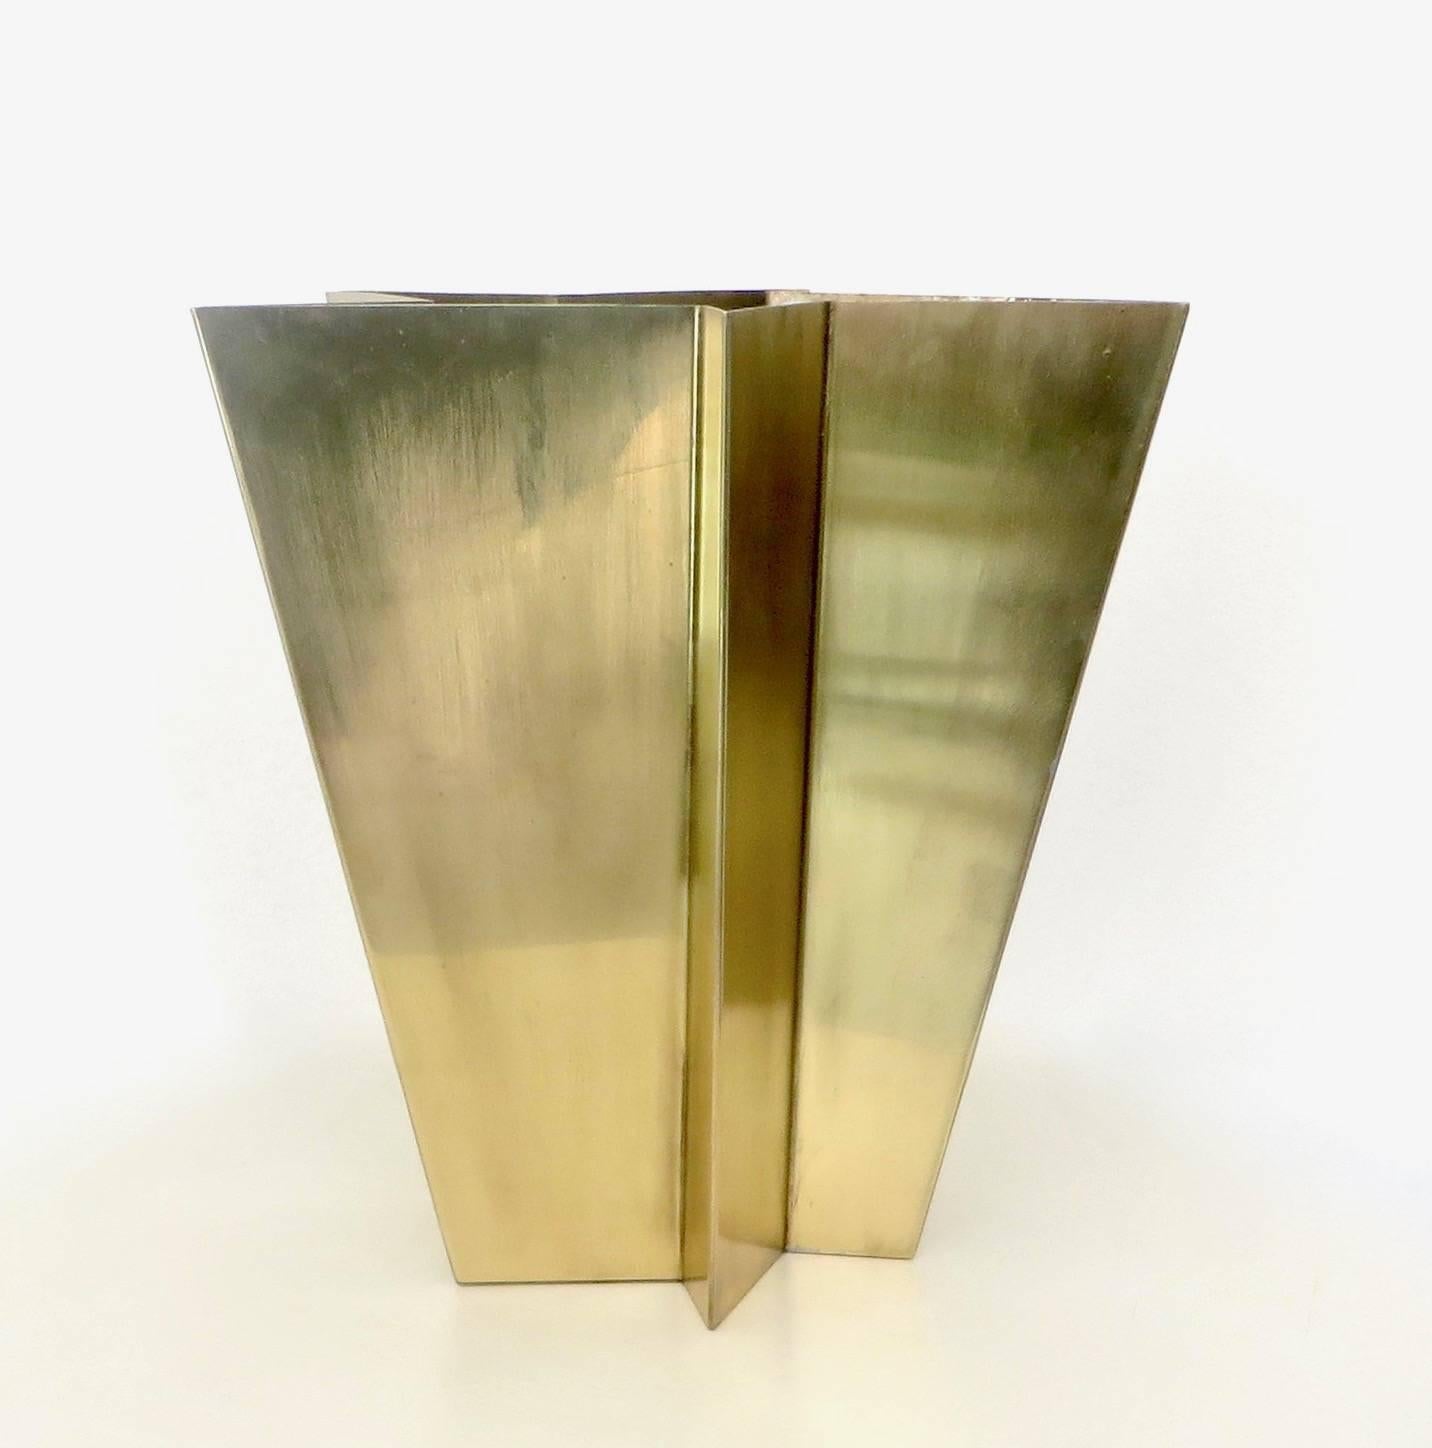 Tommaso Salocchi is a designer in Milan and the son of famed artist, designer and architect Claudio Salocchi. 
This star vase in folded brass was designed by Tommaso Salocchi, and created in 2009 and fewer than 20 were produced. 
They were all